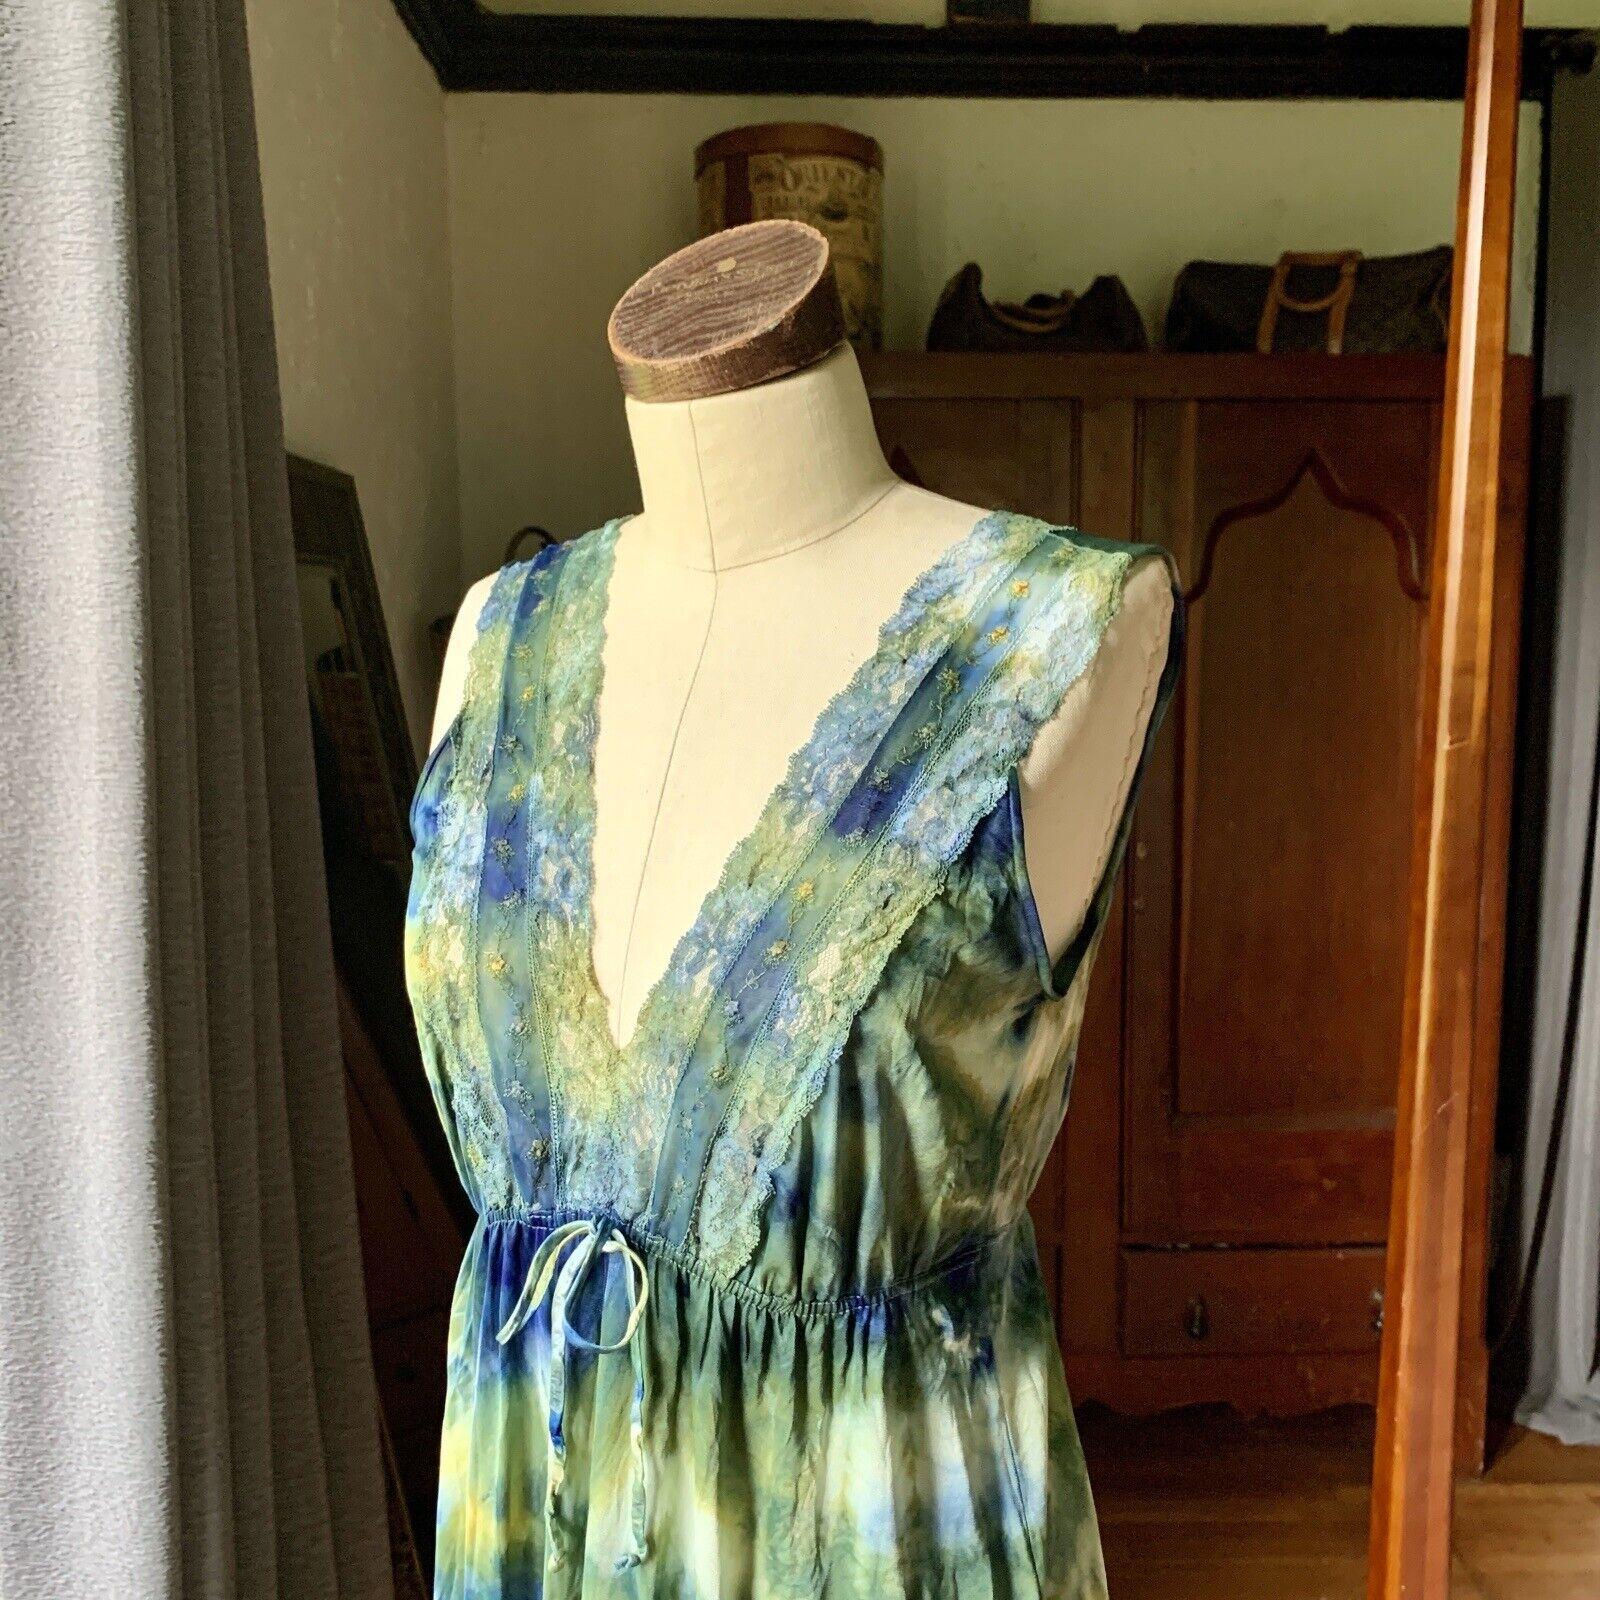 DYED PETALS Vintage Hand Botanically Dyed Tie-Dyed Slip Dress S/M 36 In Good Condition For Sale In Asheville, NC